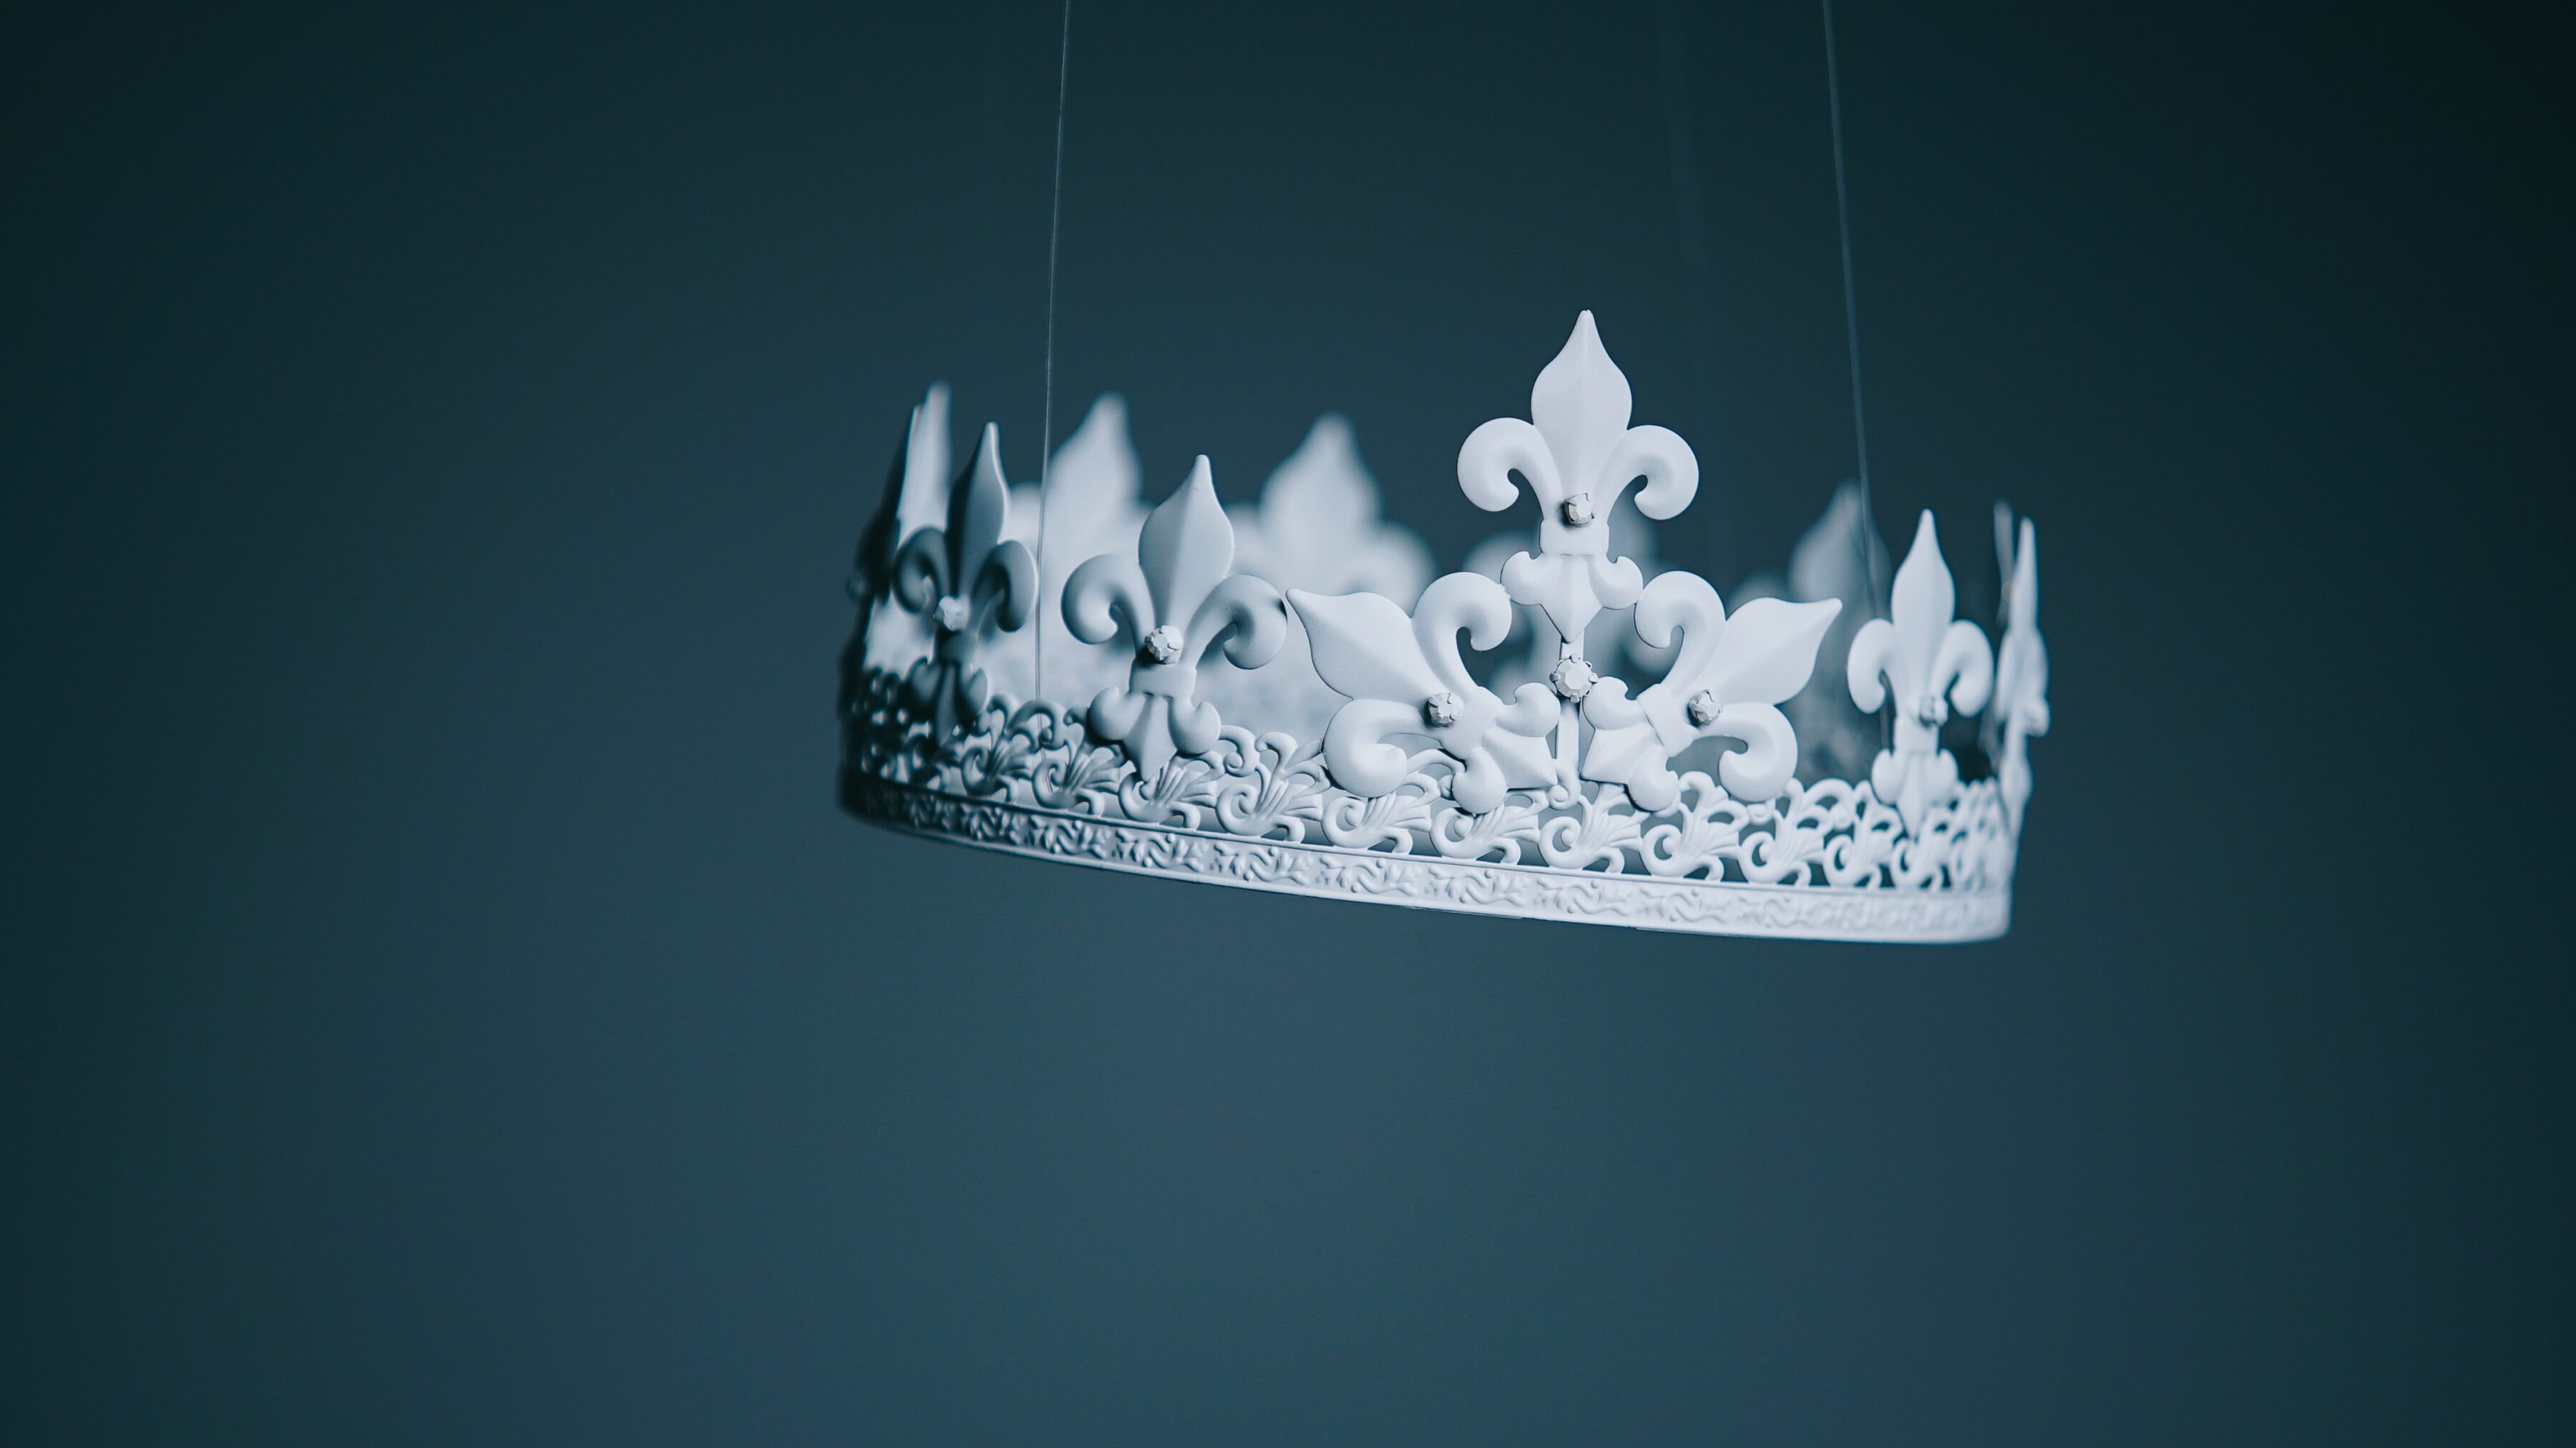 Crown being suspended in the air to represent the King's Speech